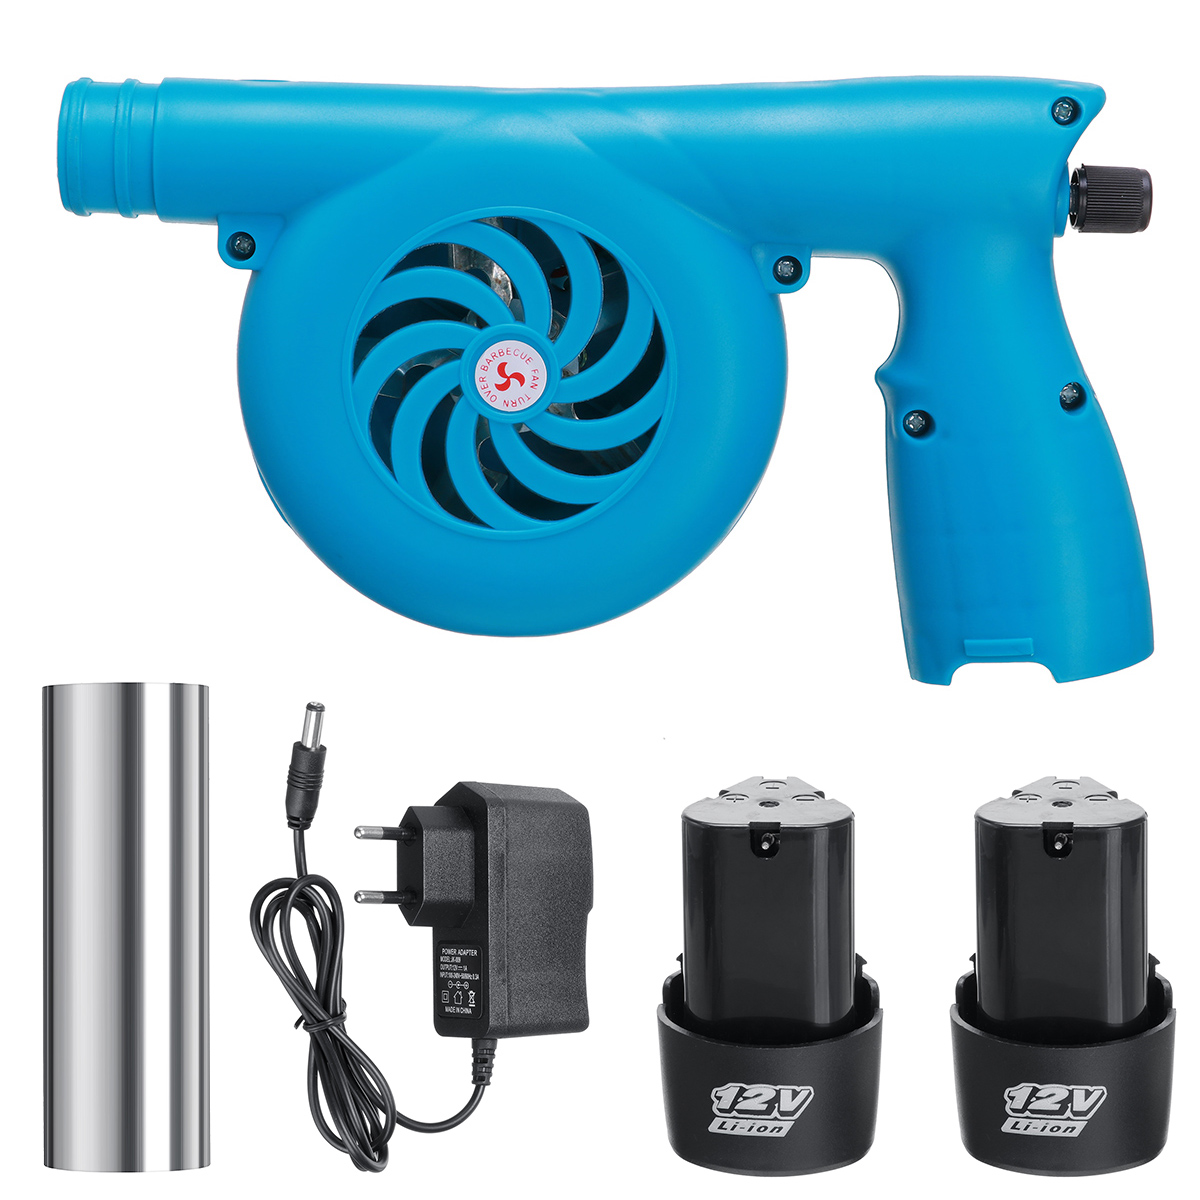 12V-Outdoor-Cooking-Electric-BBQ-Fan-Air-Blower-Rechargeable-BBQ-Grill-Fan-Guns-Portable-Fire-Campin-1861810-6